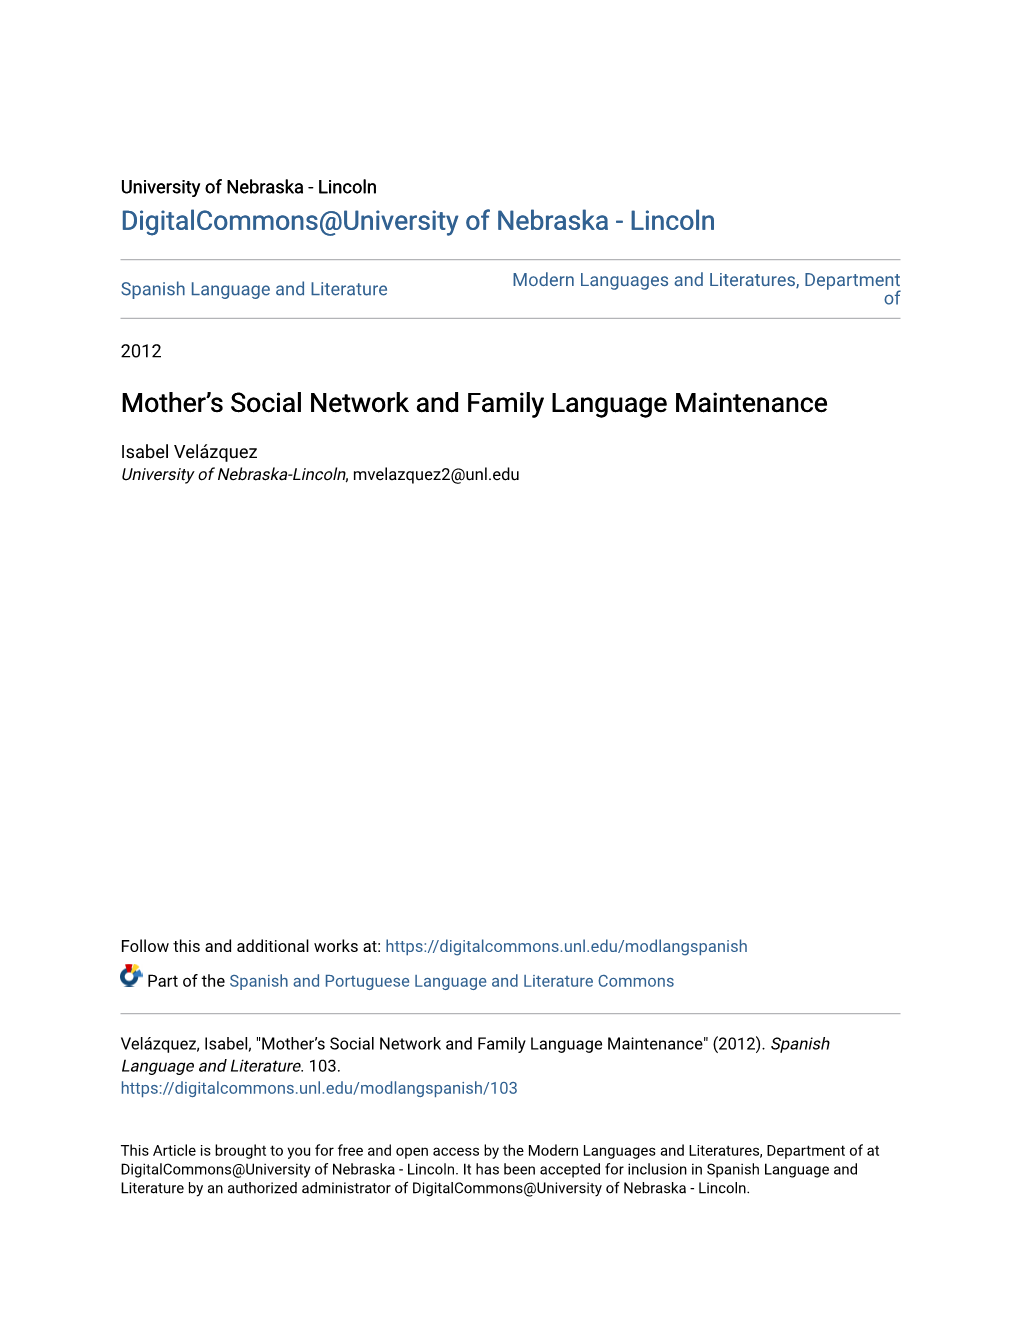 Mother's Social Network and Family Language Maintenance